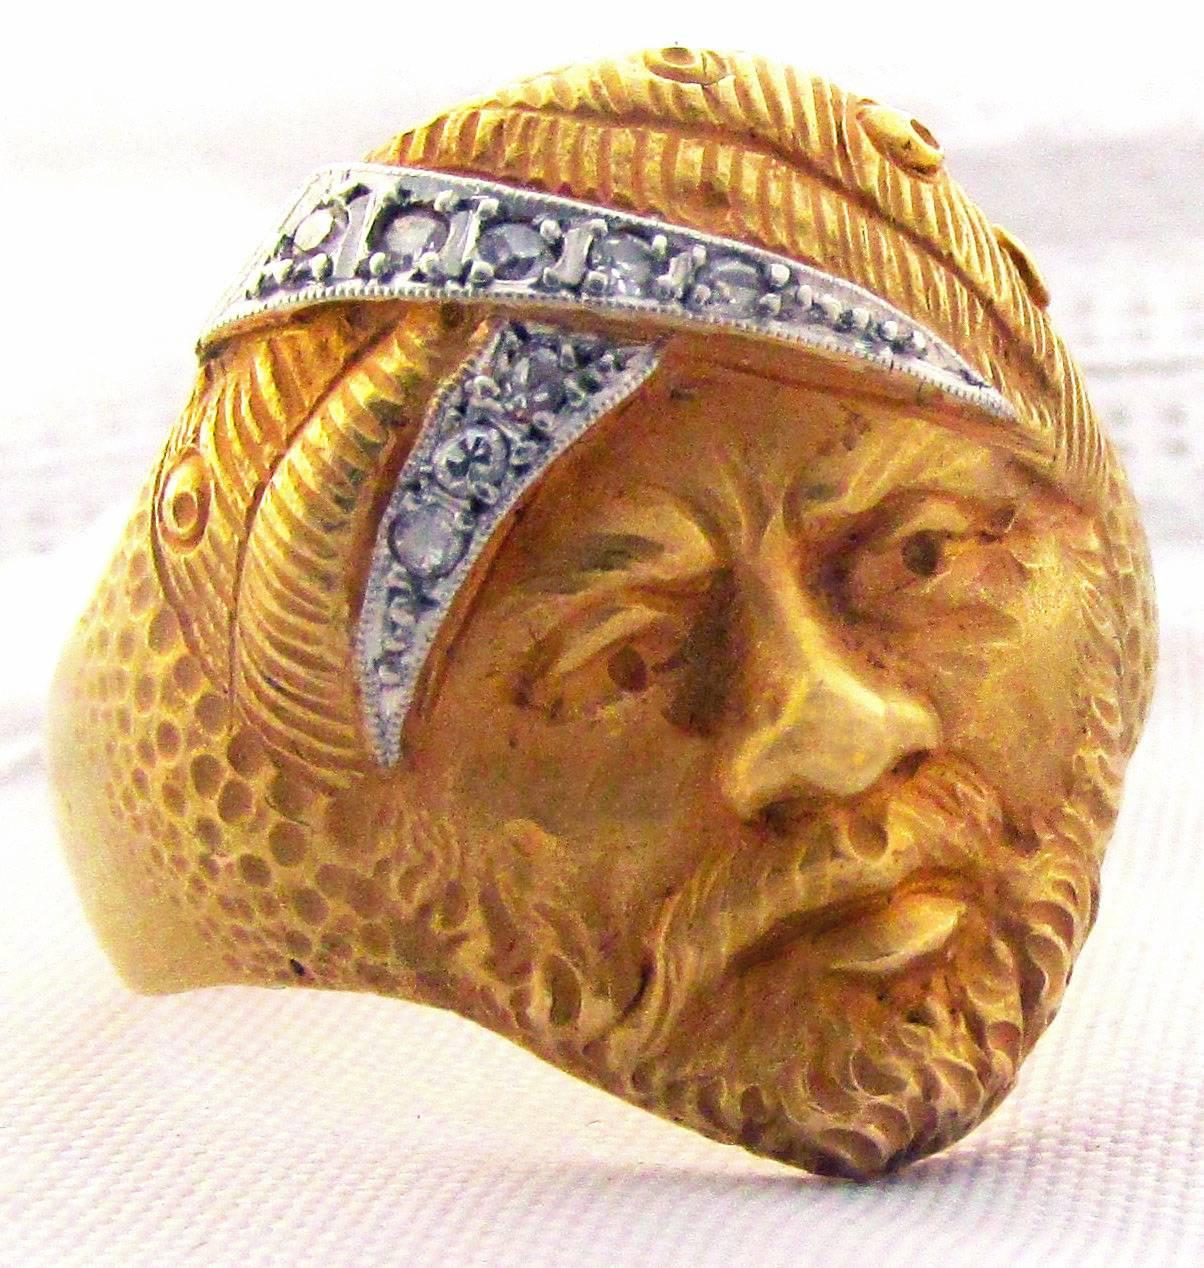 Striking early Edwardian 18K gold ring of a man in a turban set with diamonds.  The ring dates to 1900 . The ring has a French hallmark in the shape of a pineapple and a makers mark 